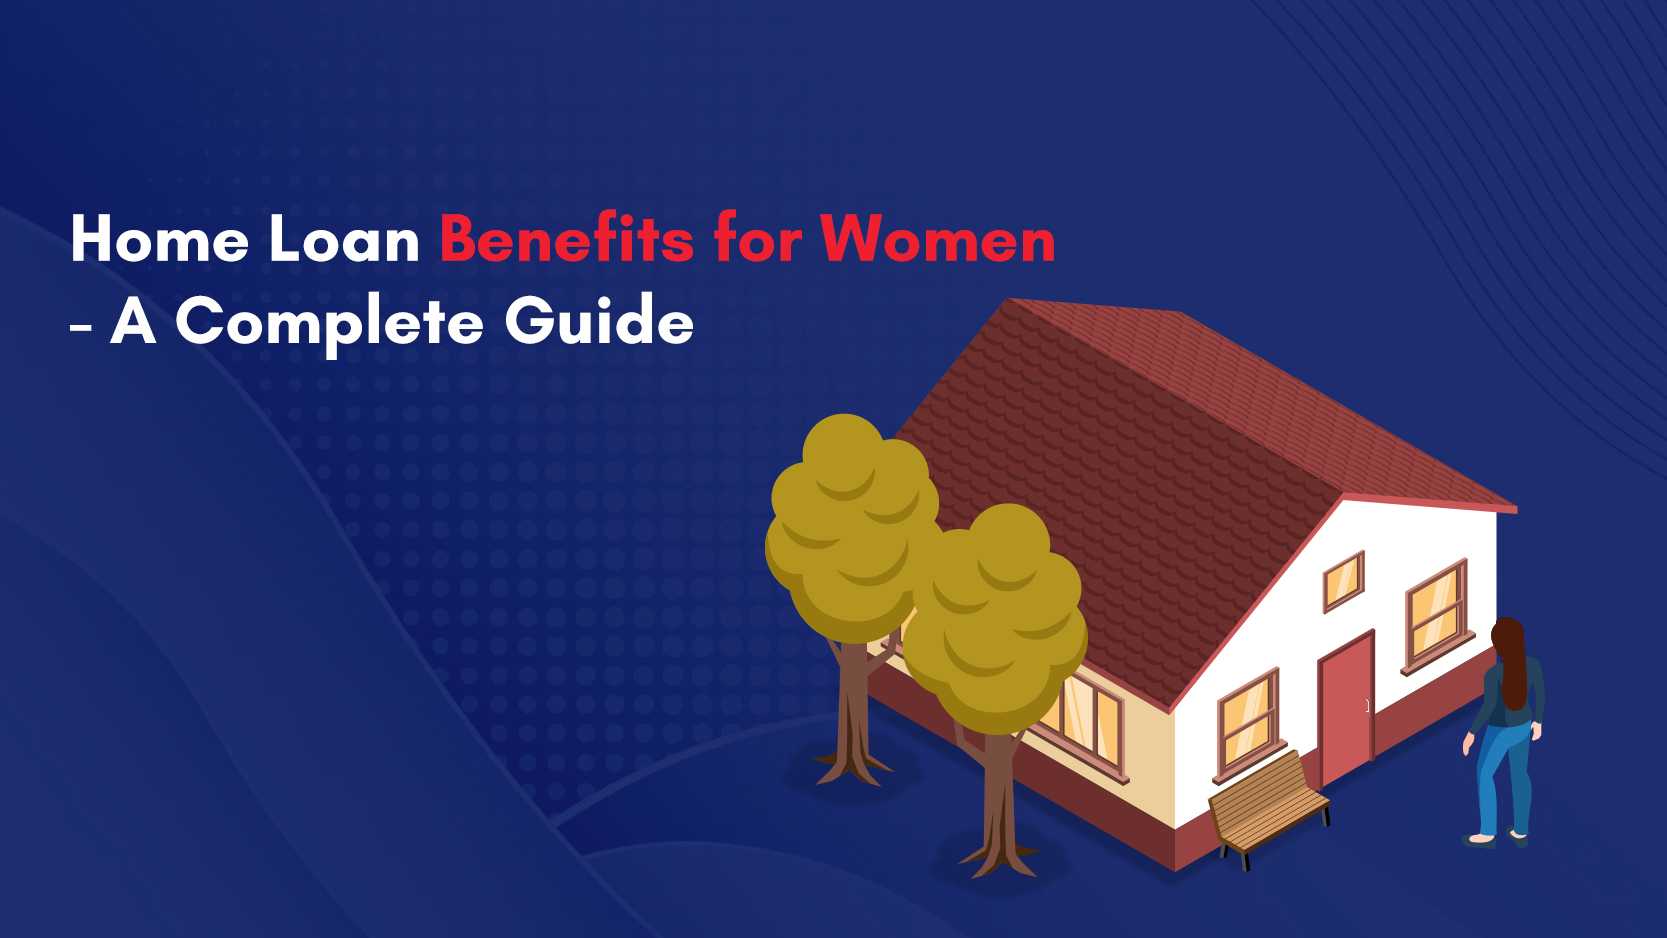 Home Loan Benefits for Women - A Complete Guide